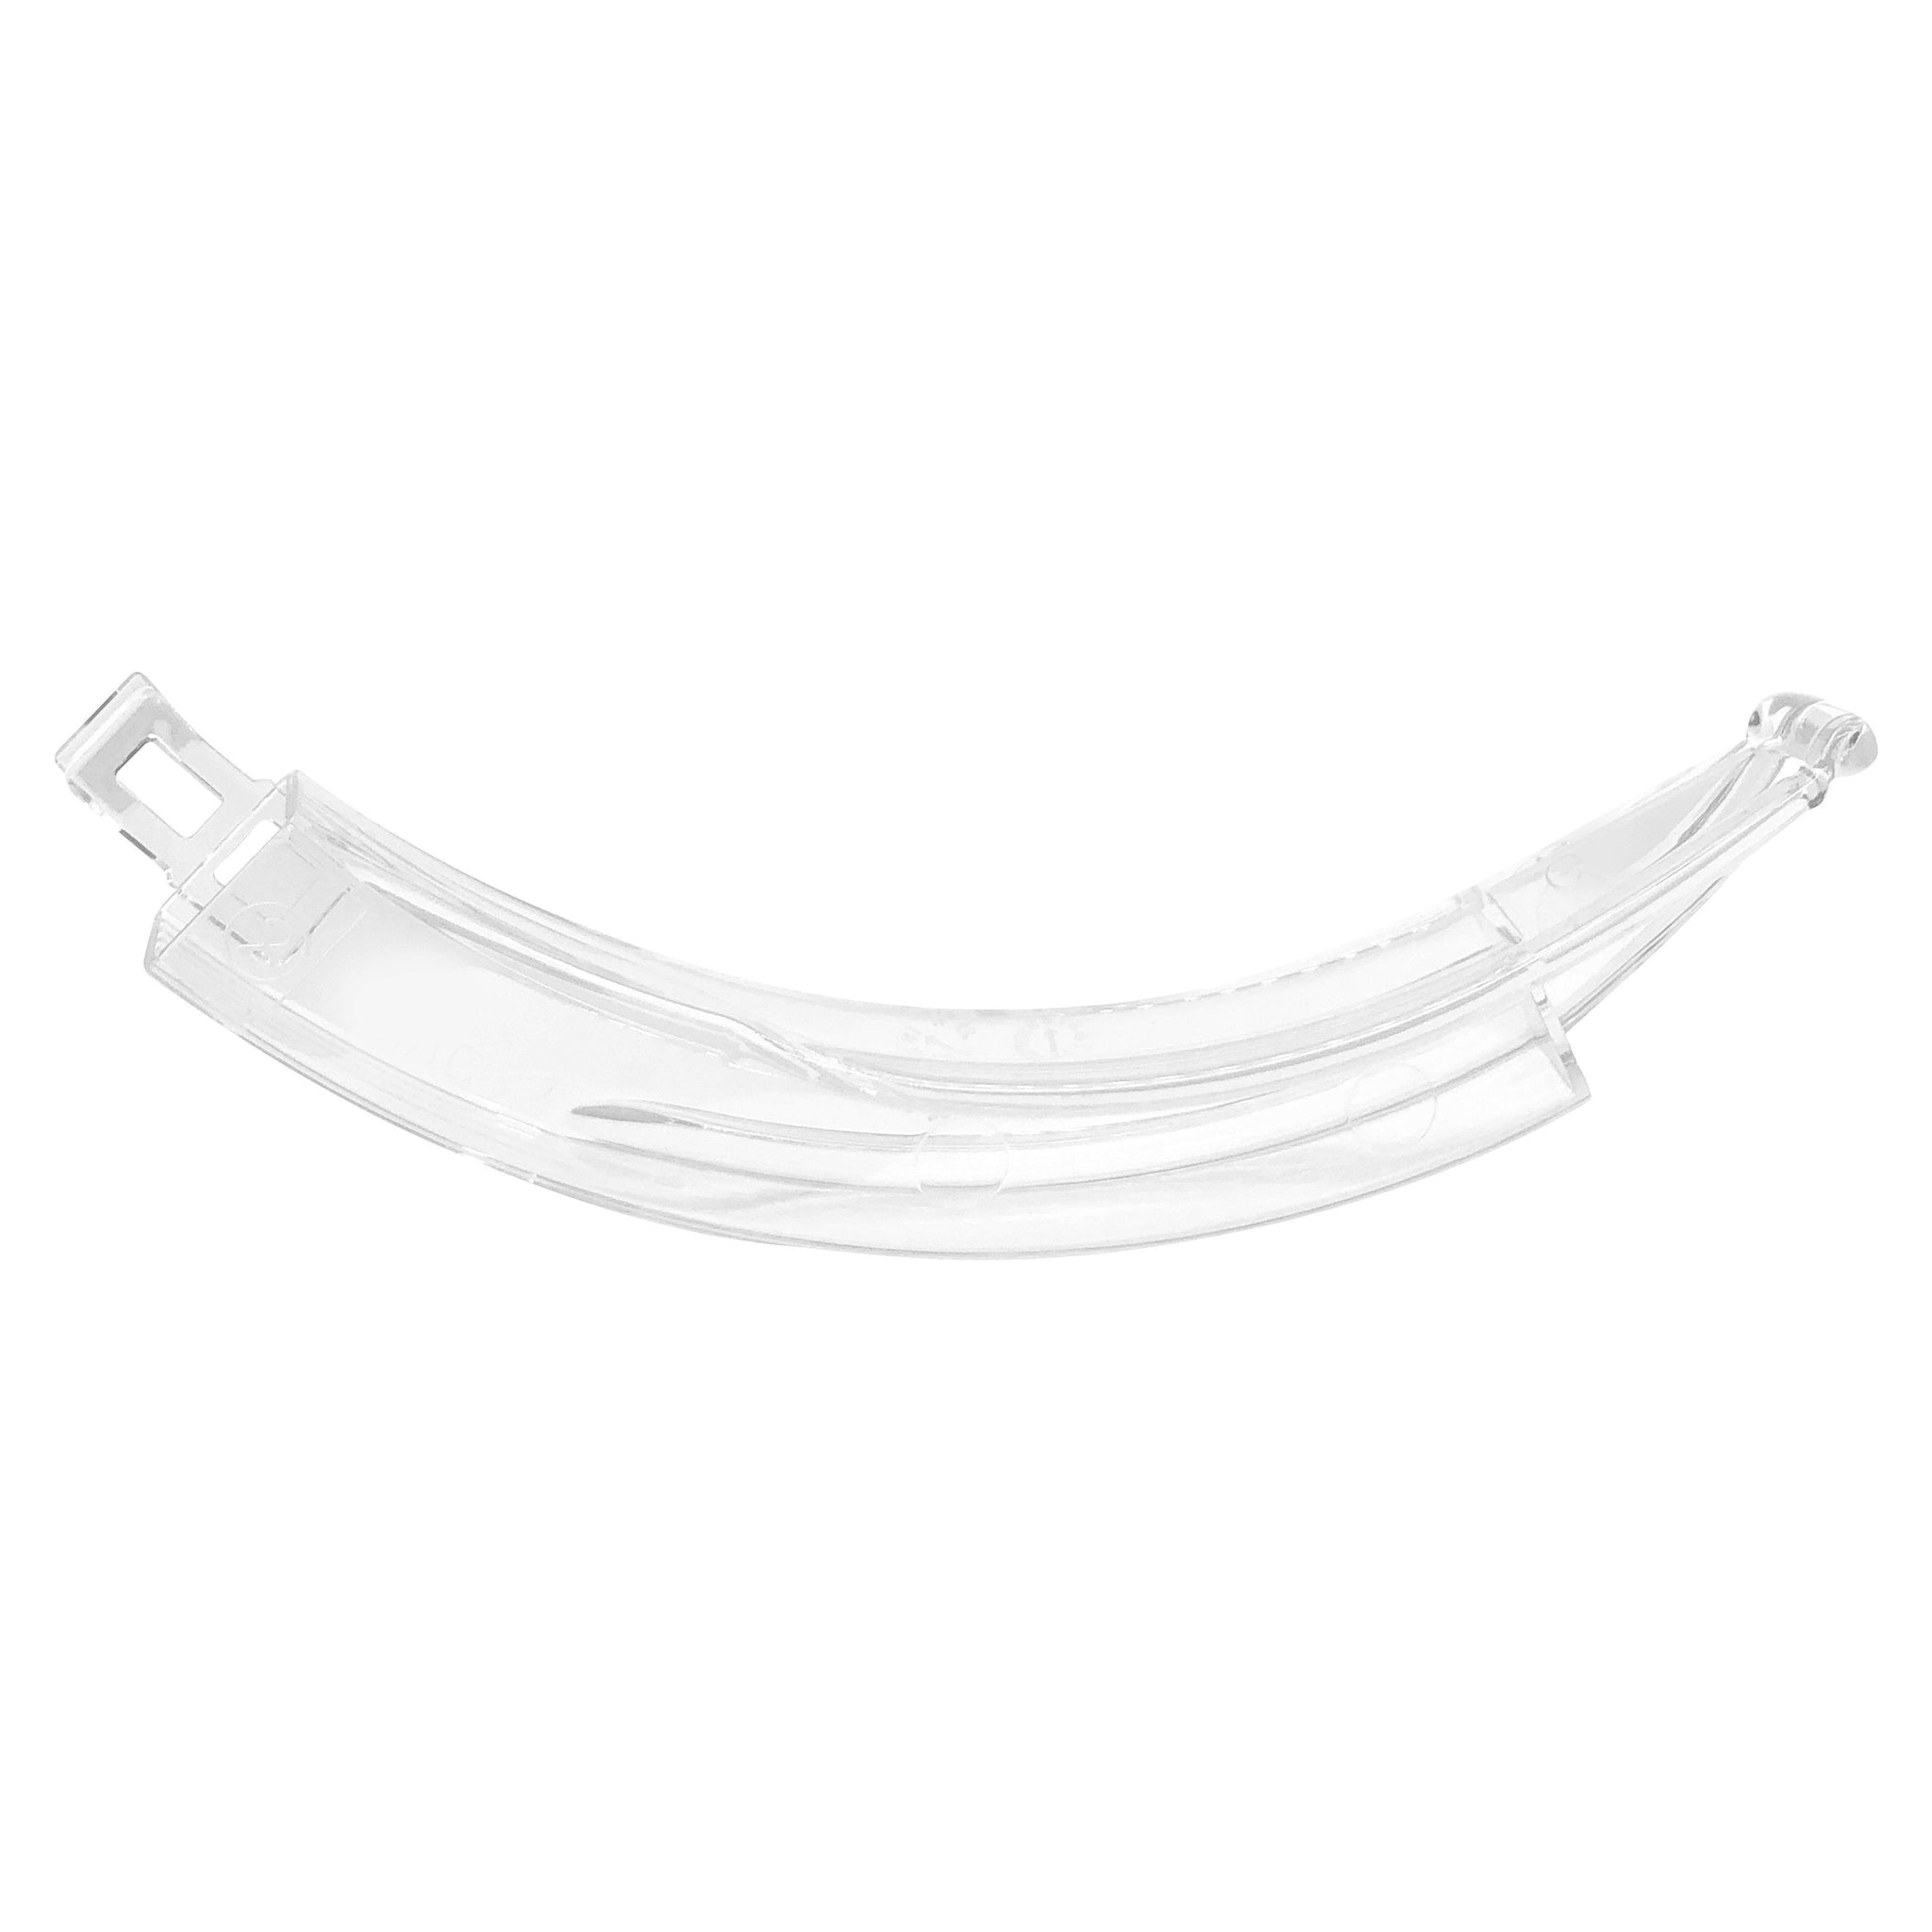 [collection-title]-Infinium ClearVue Disposable Macintosh Laryngoscope Camera Blade MAC5 (Difficult Airway)-Capnography Supply